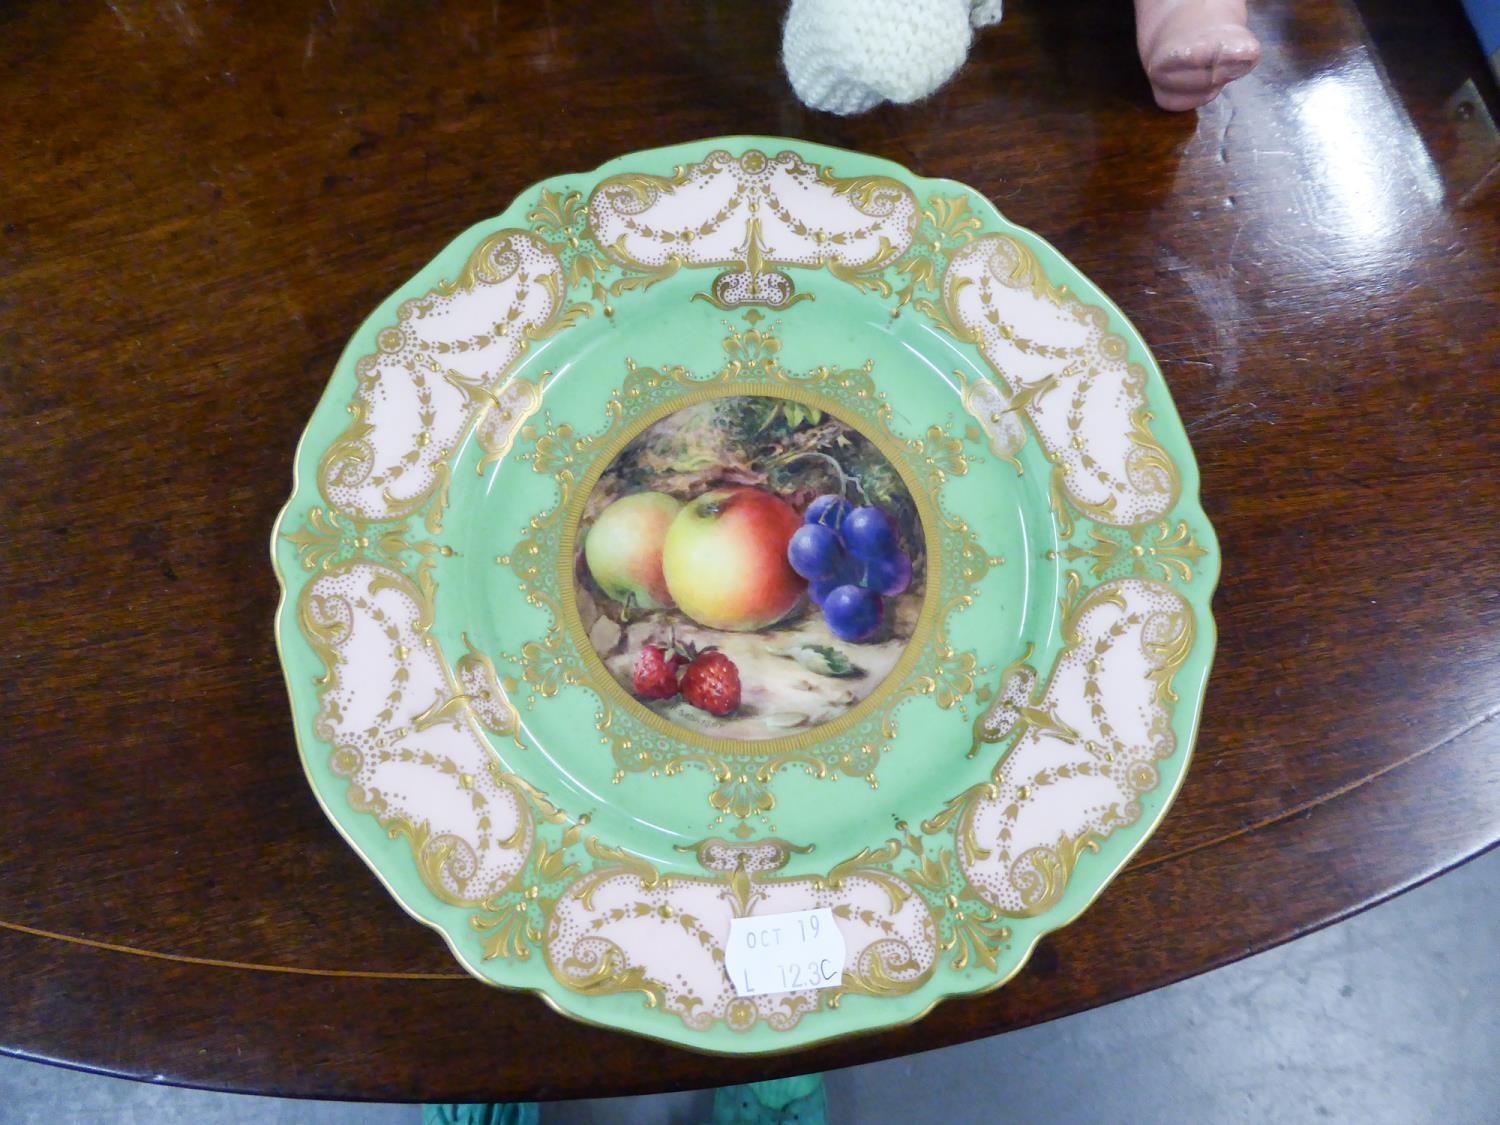 EARLY TWENTIETH CENTURY FRUIT PAINTED ROYAL WORCESTER CHIN PLATE BY SEBRIGHT, with apple green and